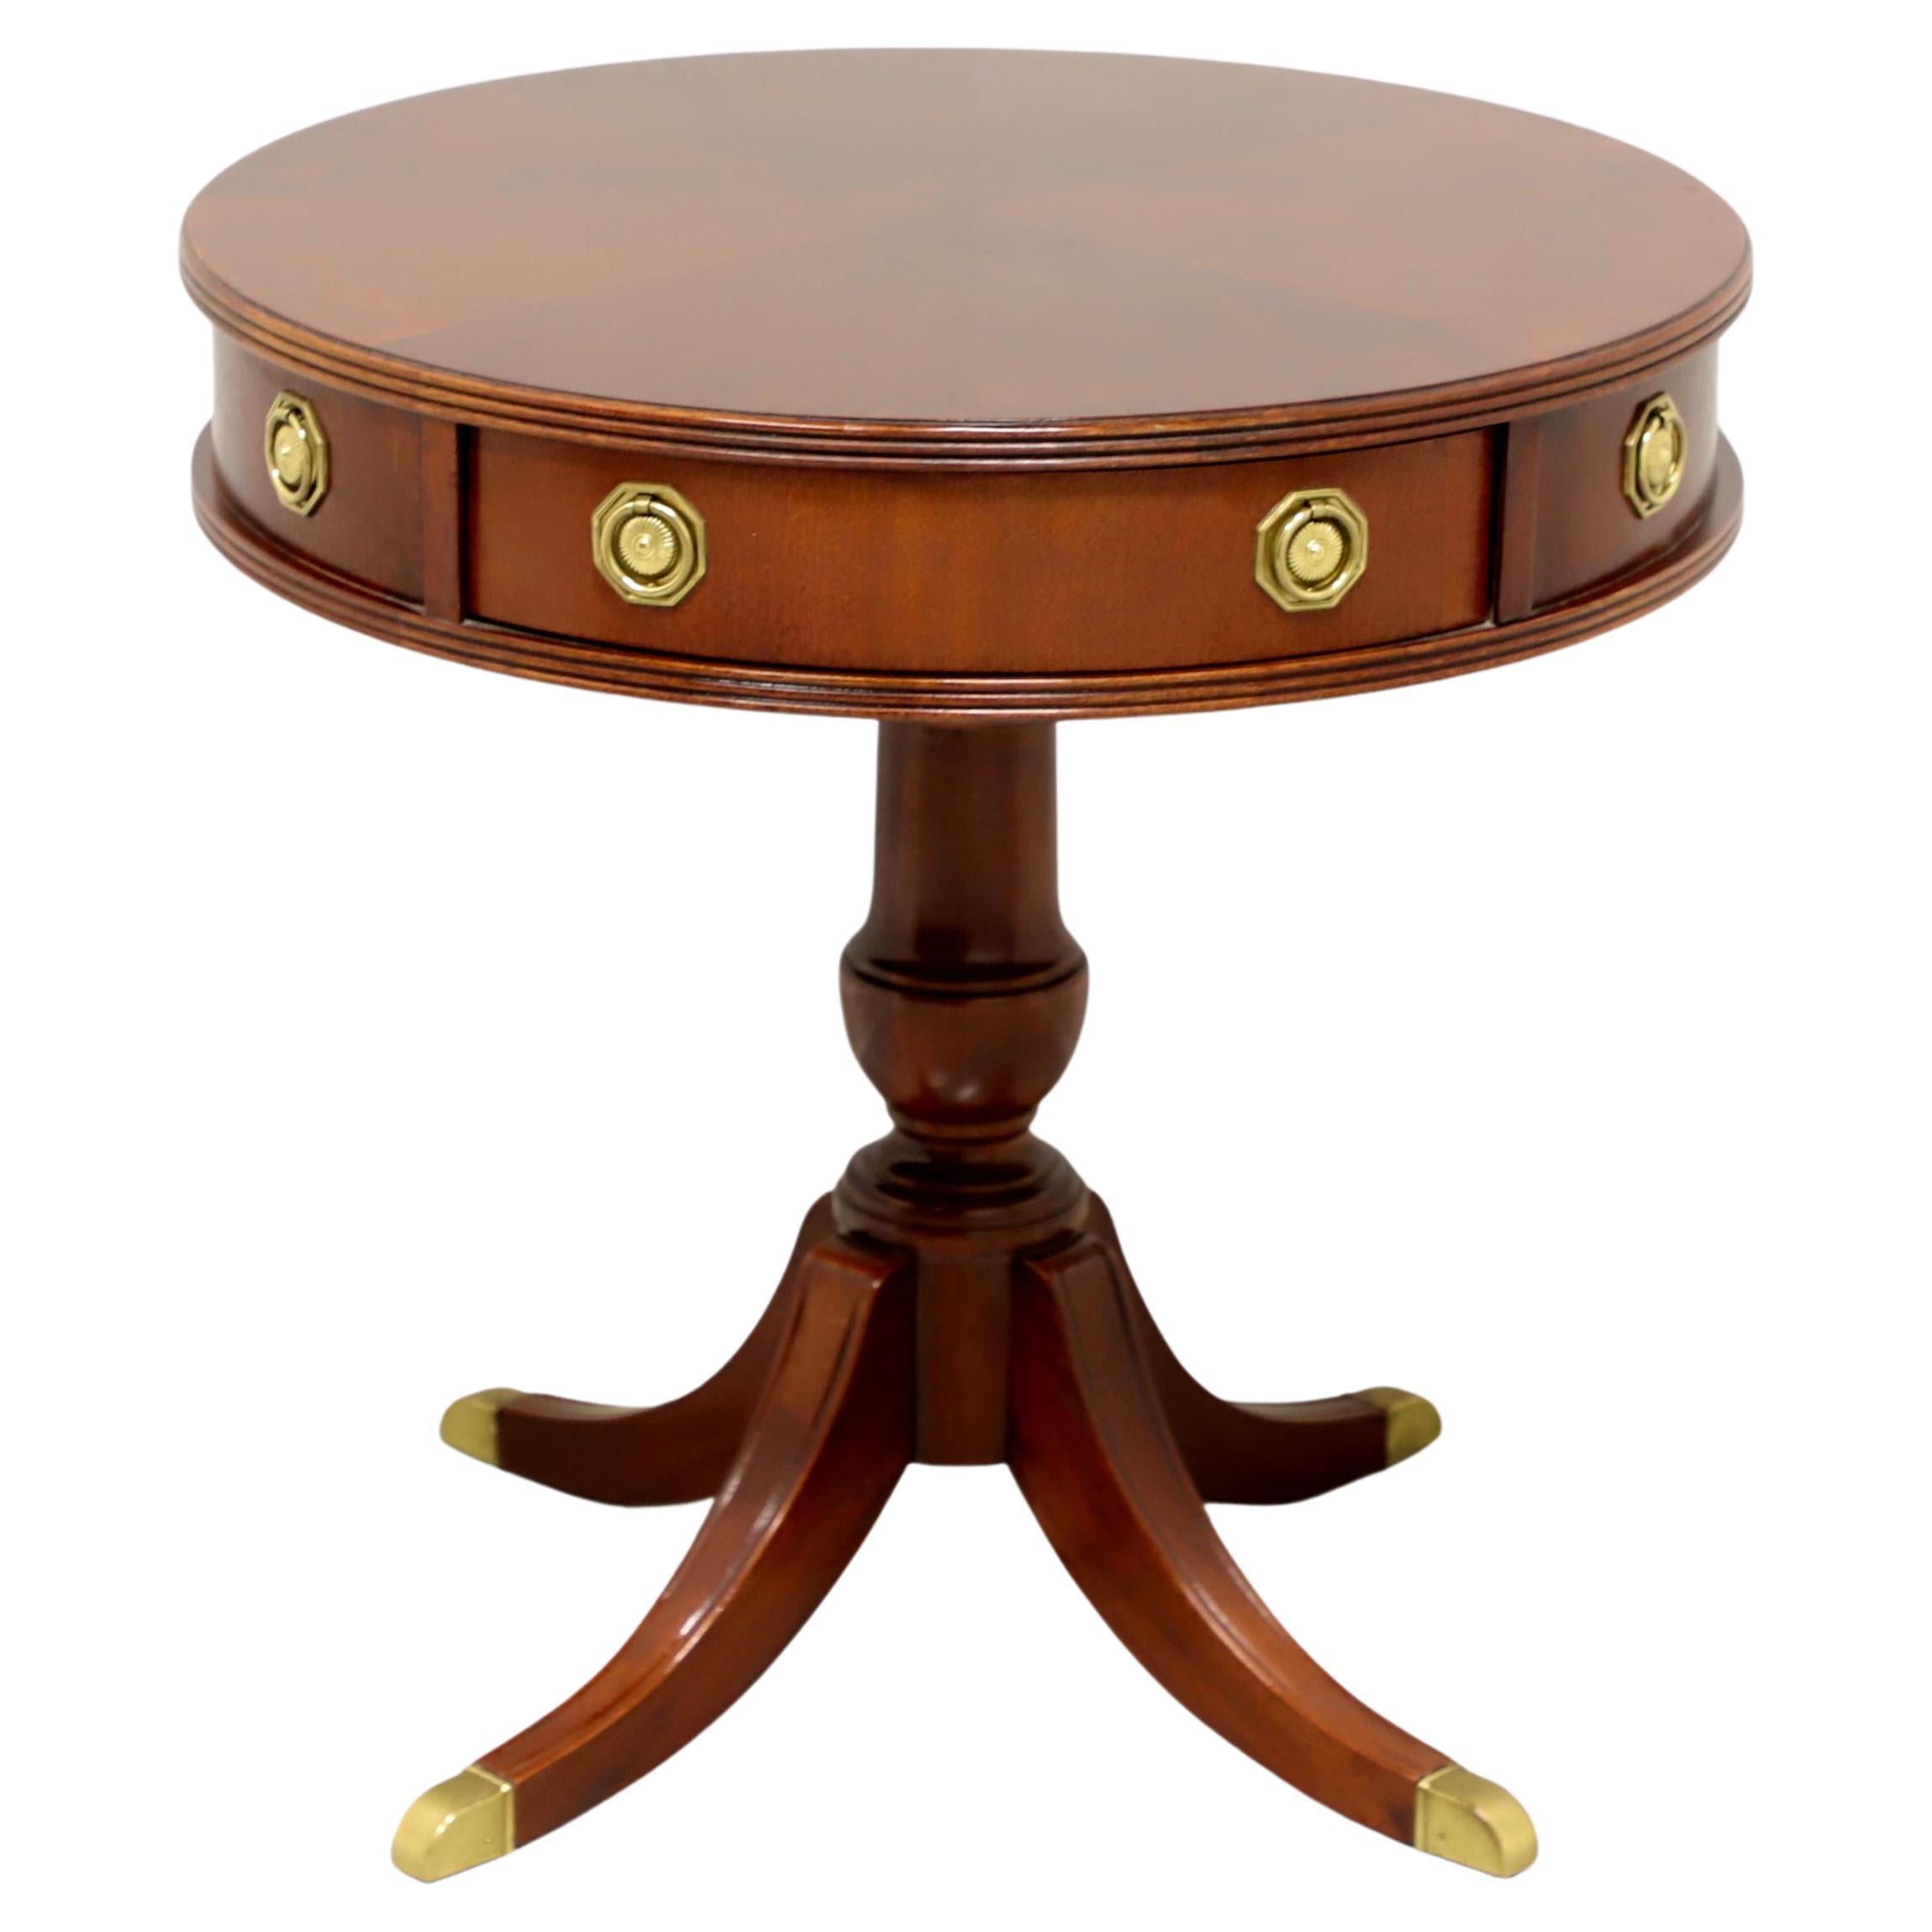 HAMMARY Banded Inlaid Mahogany Round Drum Table with Pedestal Base